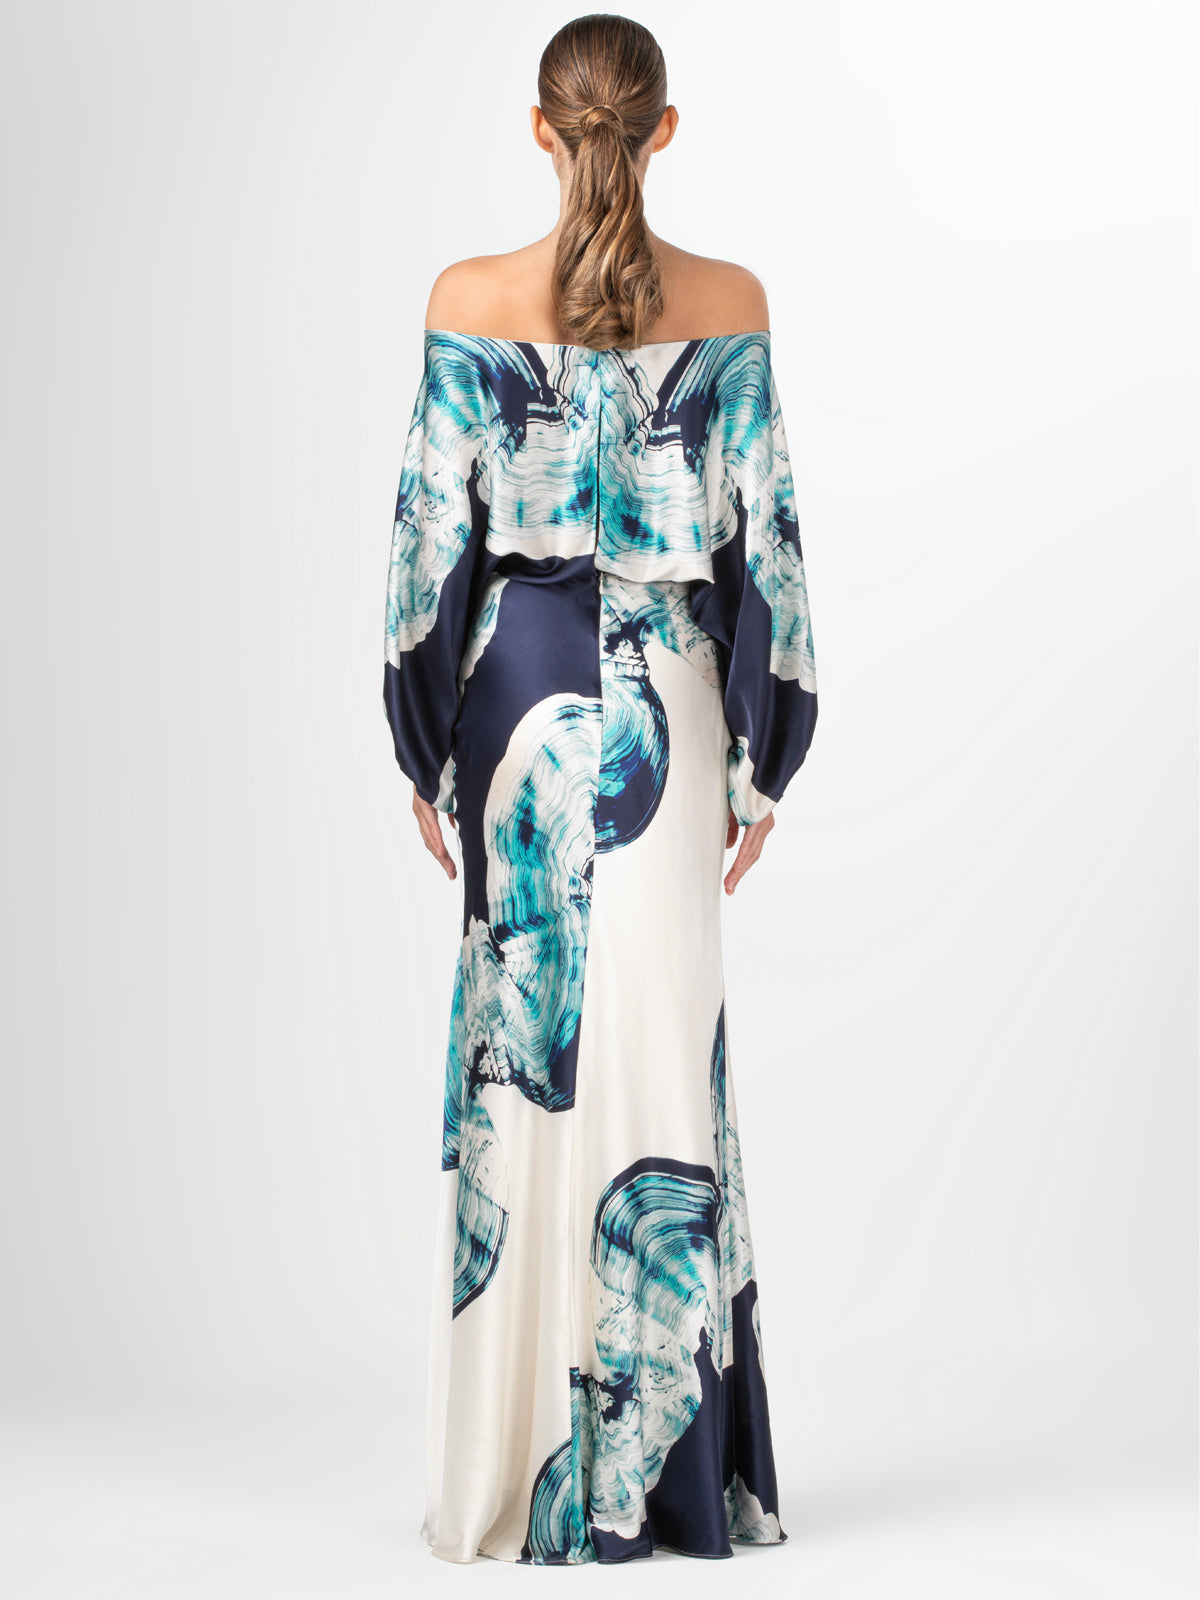 An elegant off-the-shoulder Rossi Dress Navy Abstract Wave featuring a blue and white abstract print on silk fabric.